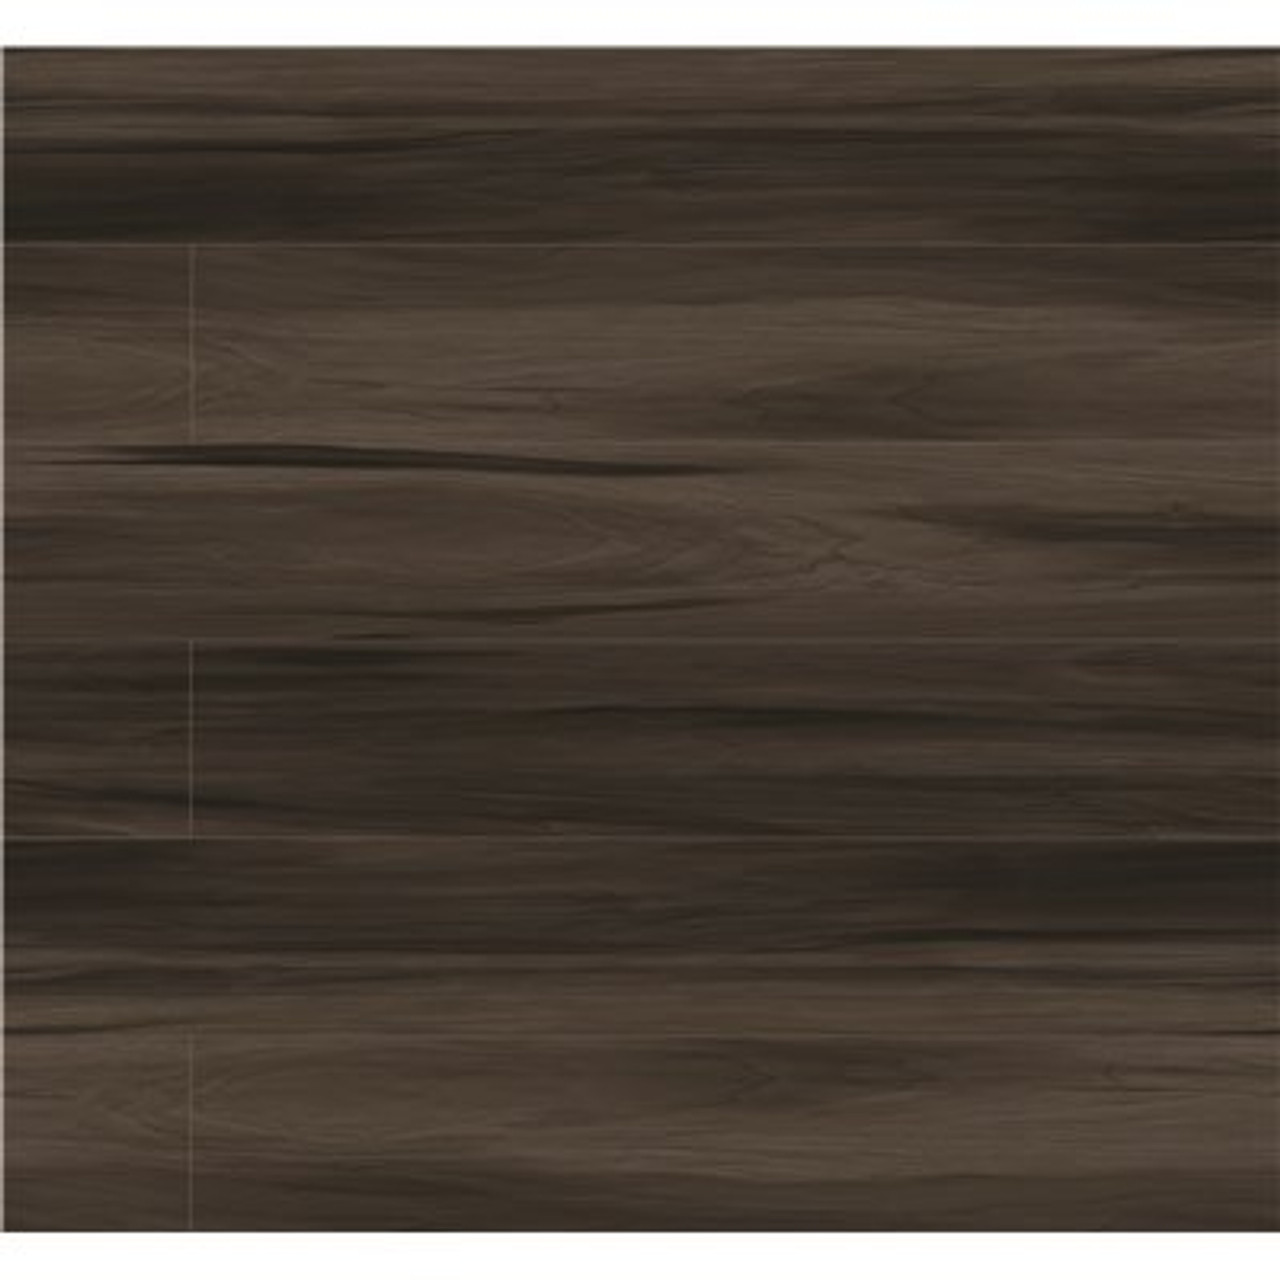 A&A Surfaces Heritage Loto 7 In. W X 48 In. L Rigid Core Click Lock Luxury Vinyl Plank Flooring (19.02 Sq. Ft./Case)